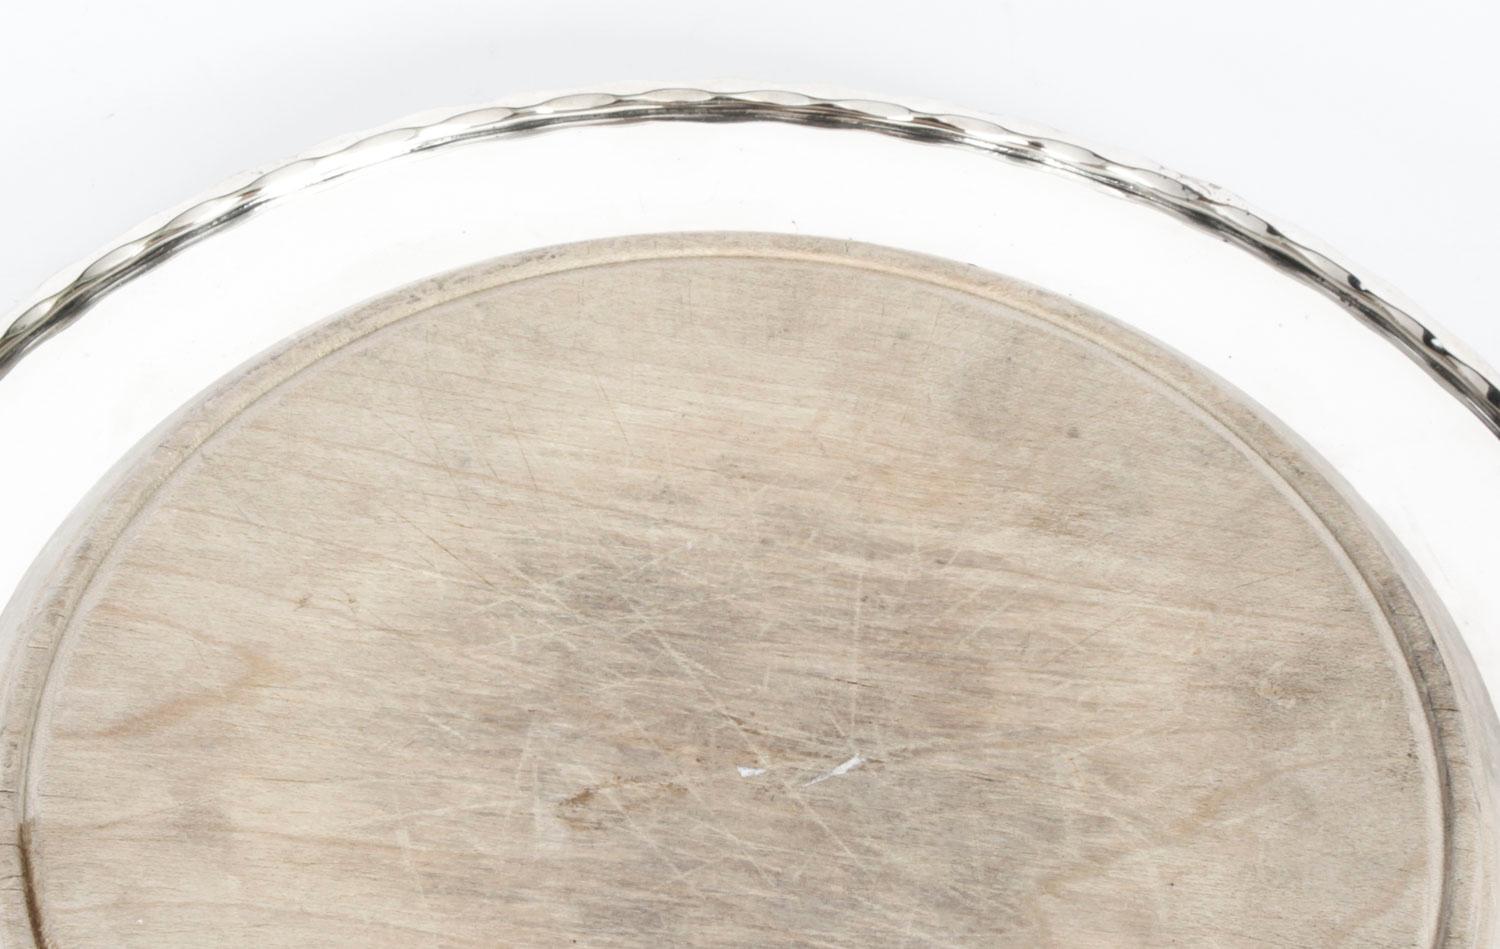 This is an exquisite antique English silver plated bread or cheese cutting board by the silversmith Henry Fielding & Son Birmingham, circa 1890 in date.
 
The round silver plated plate salver features an inset cutting board.
 
Add an elegant